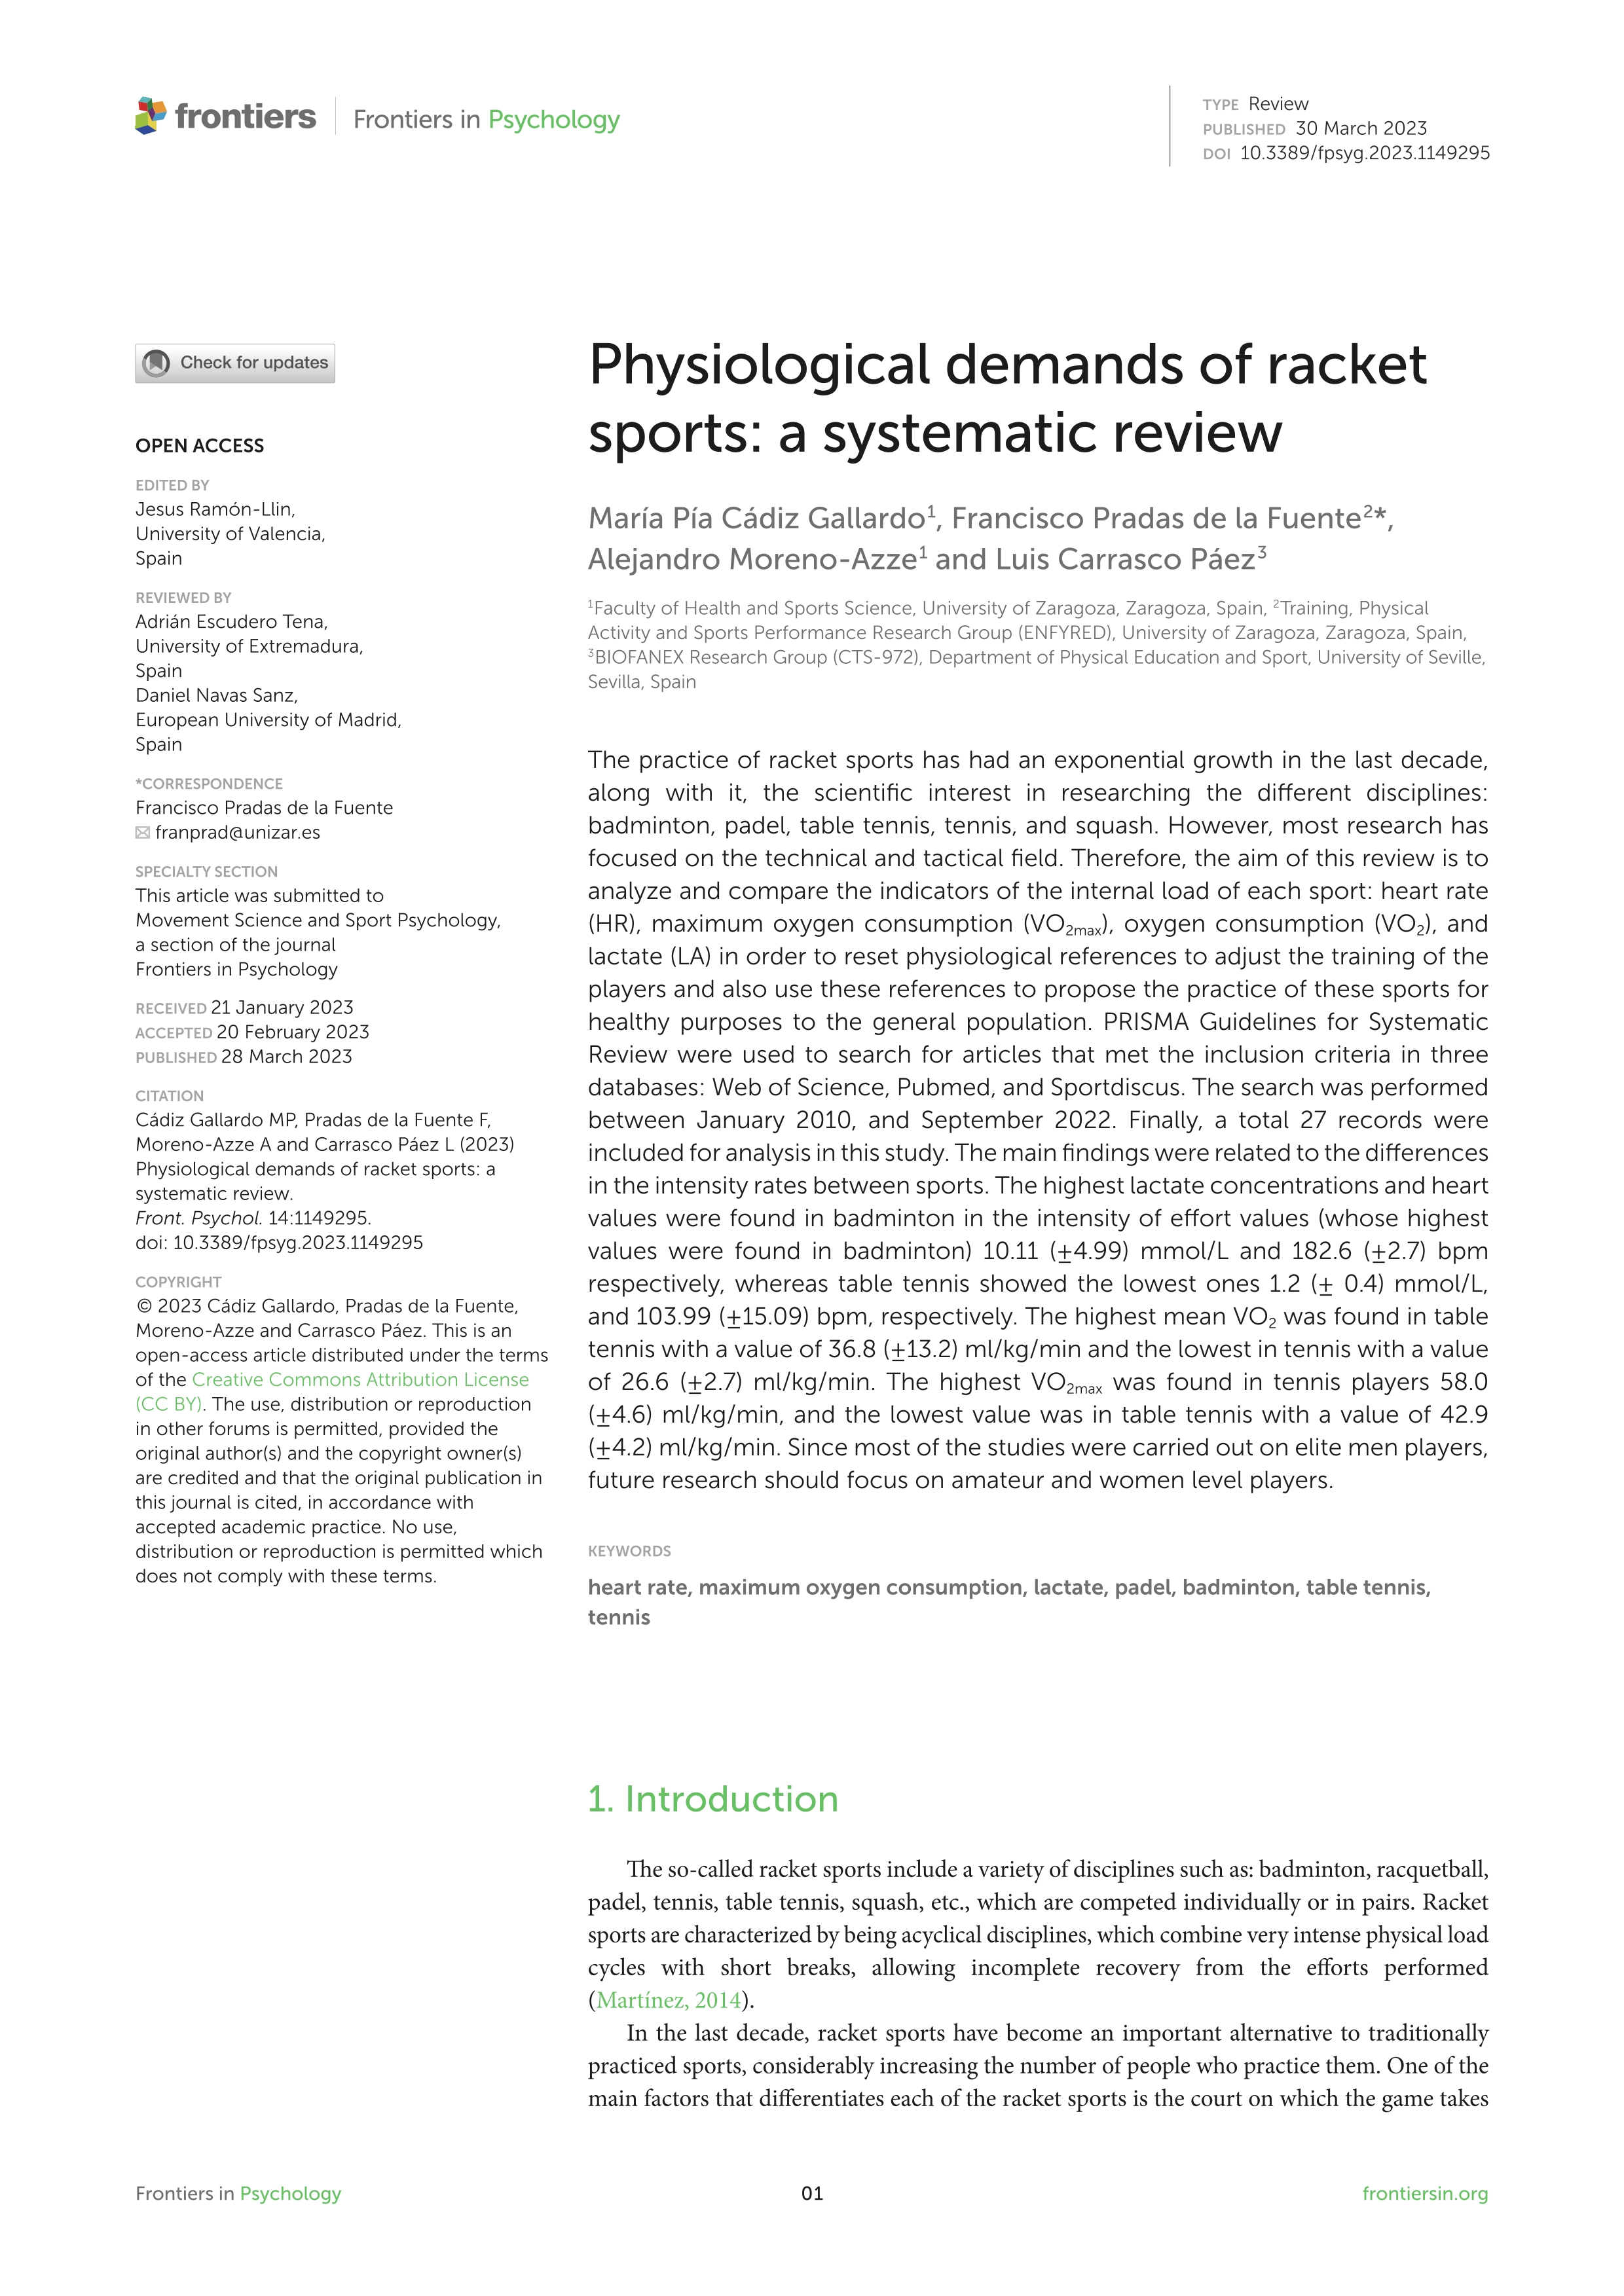 Physiological demands of racket sports: a systematic review